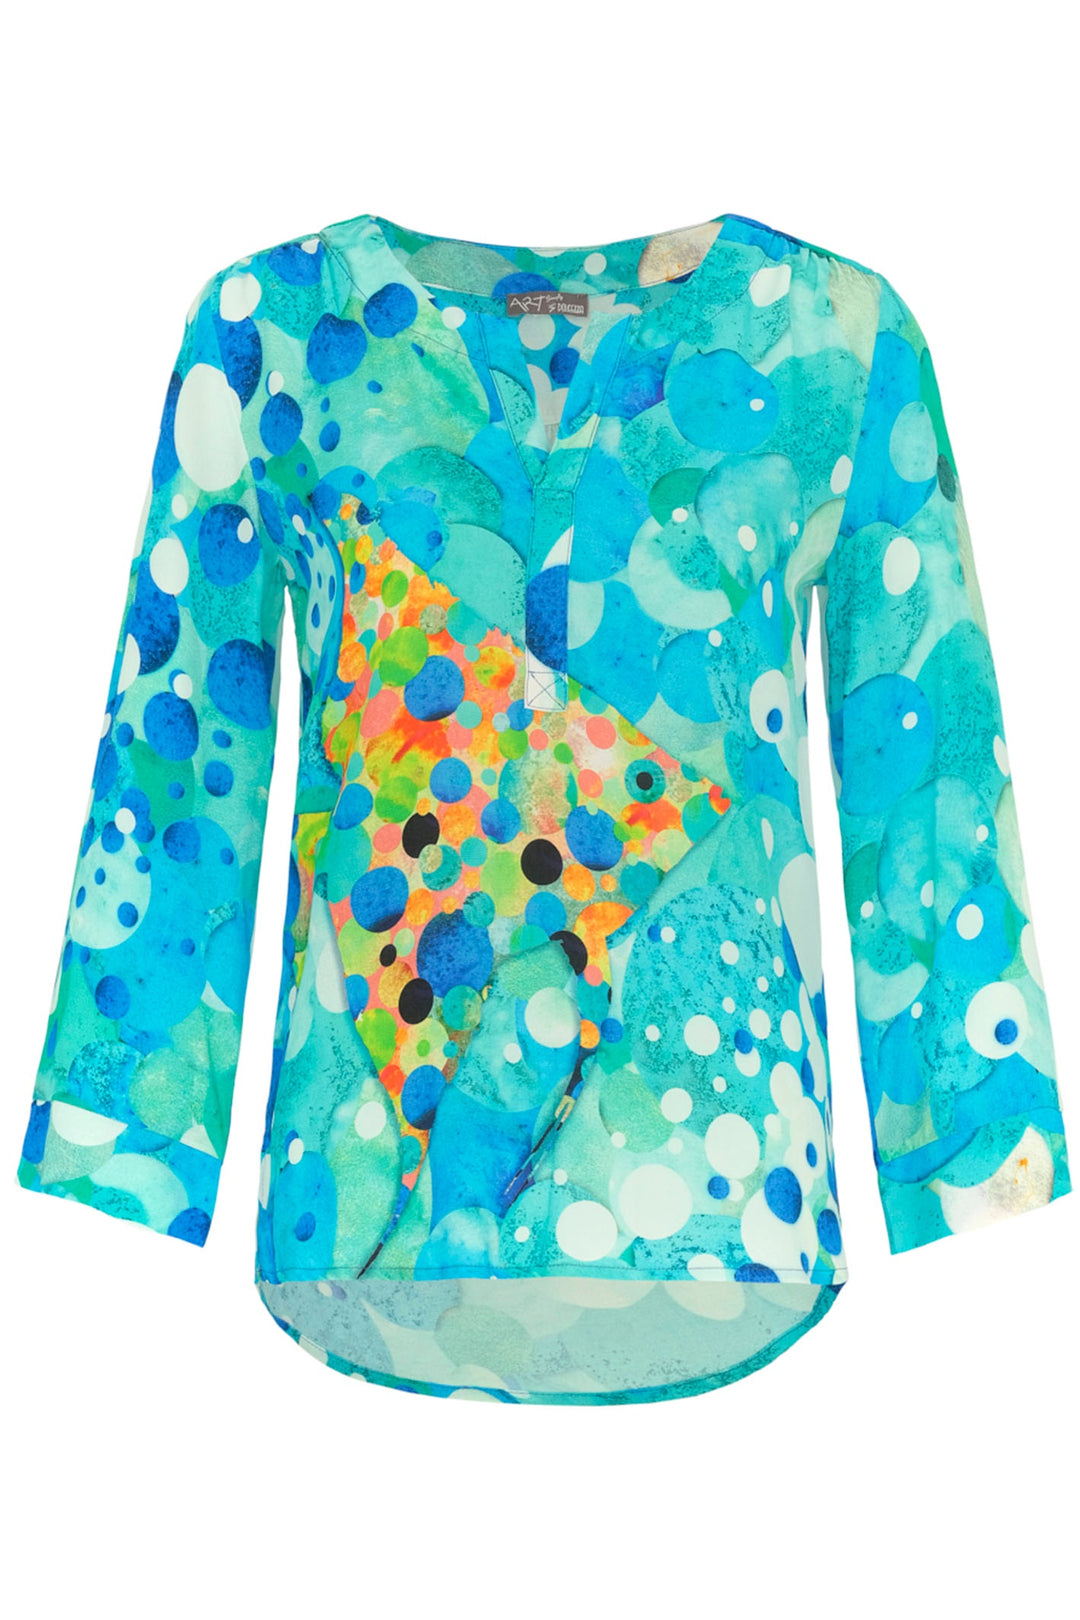 Dolcezza 24622 Turquoise Blue Big Angel Fish Mosaic Top - Dotique Chesterfield